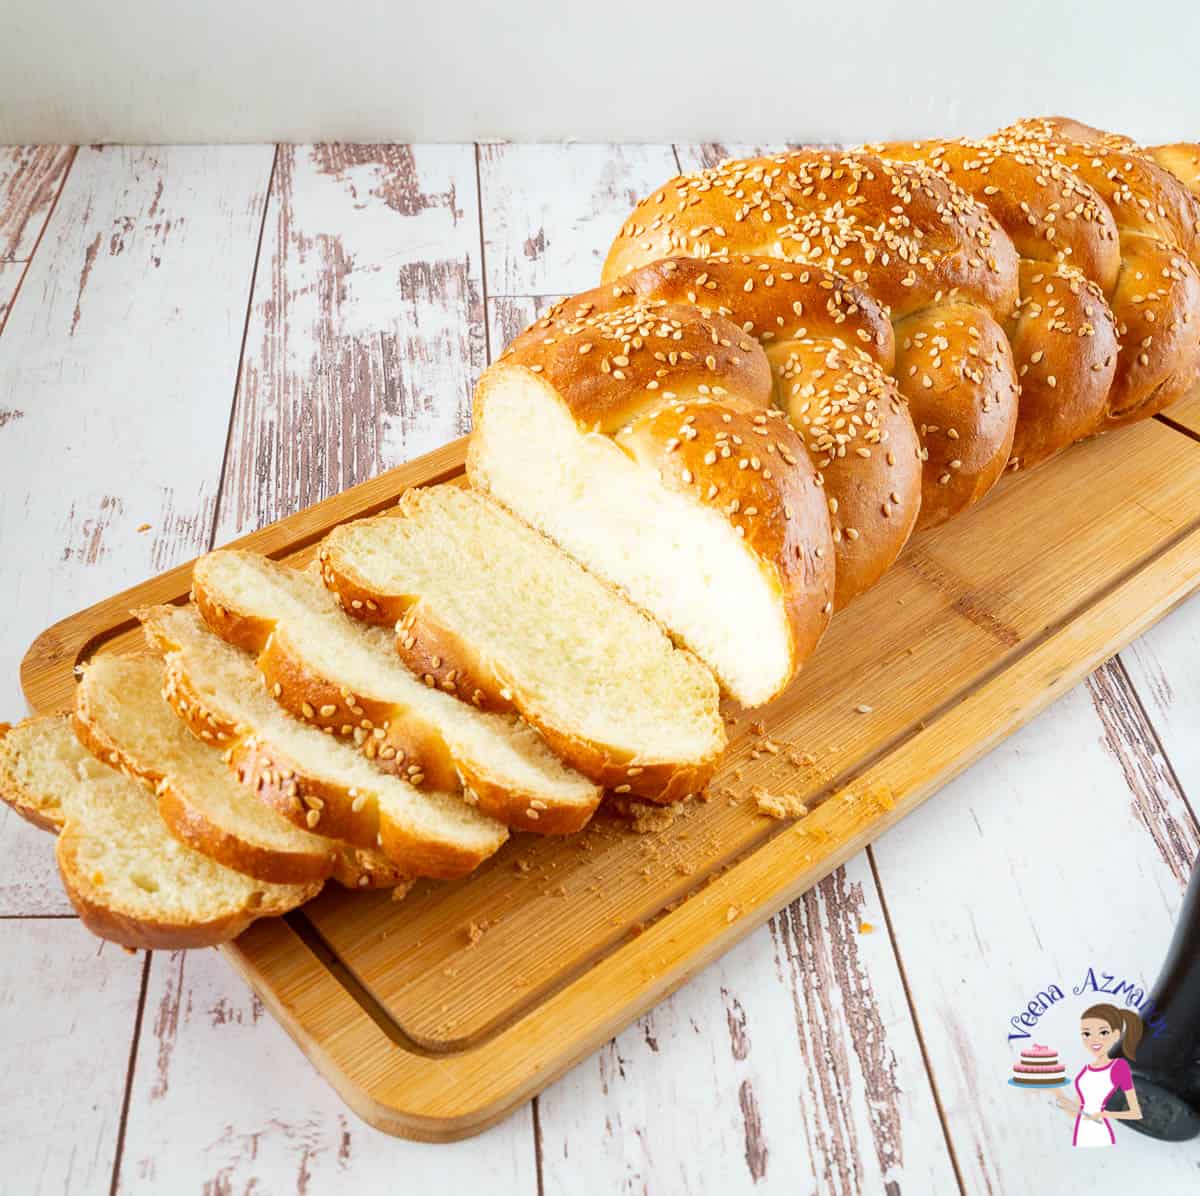 Sliced Challah bread on a wooden board.